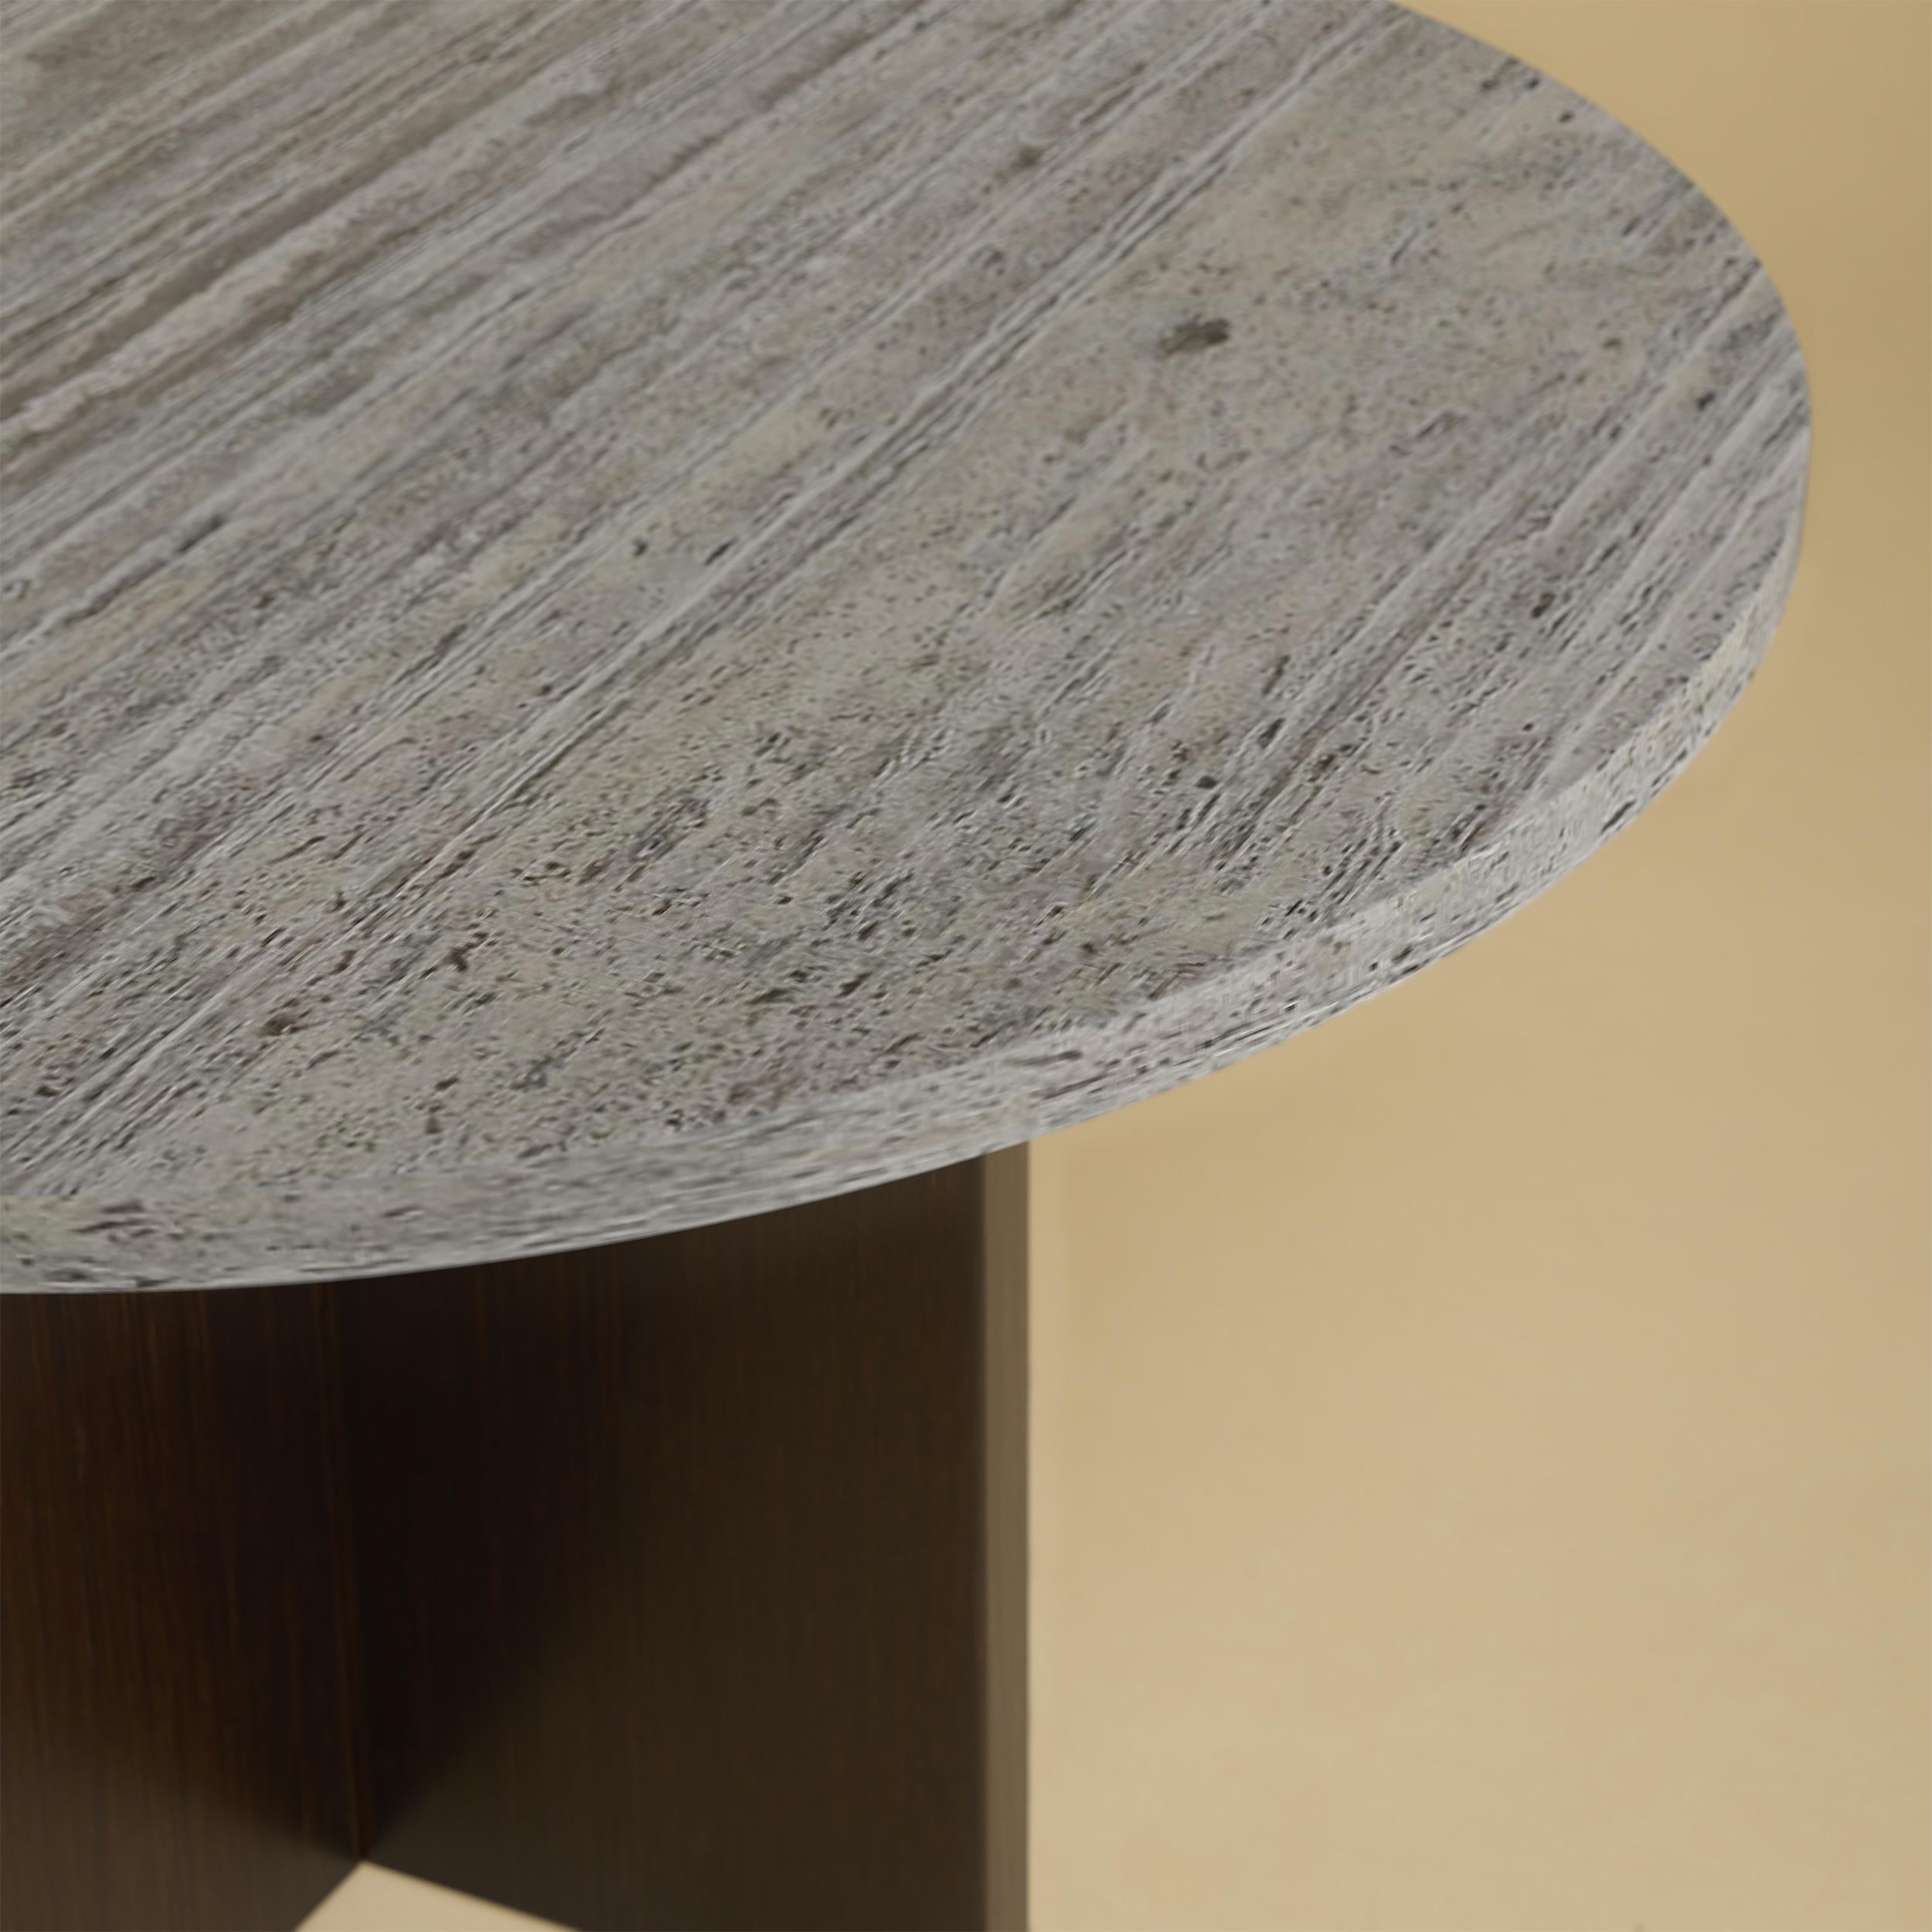 The Tinian coffee table is produced with an oak wood base and Titanium travertine top. The top is circular and 60cm in diameter, while the base is obtained by gluing oak planks perpendicular to each other.
Artisanal production made of technological